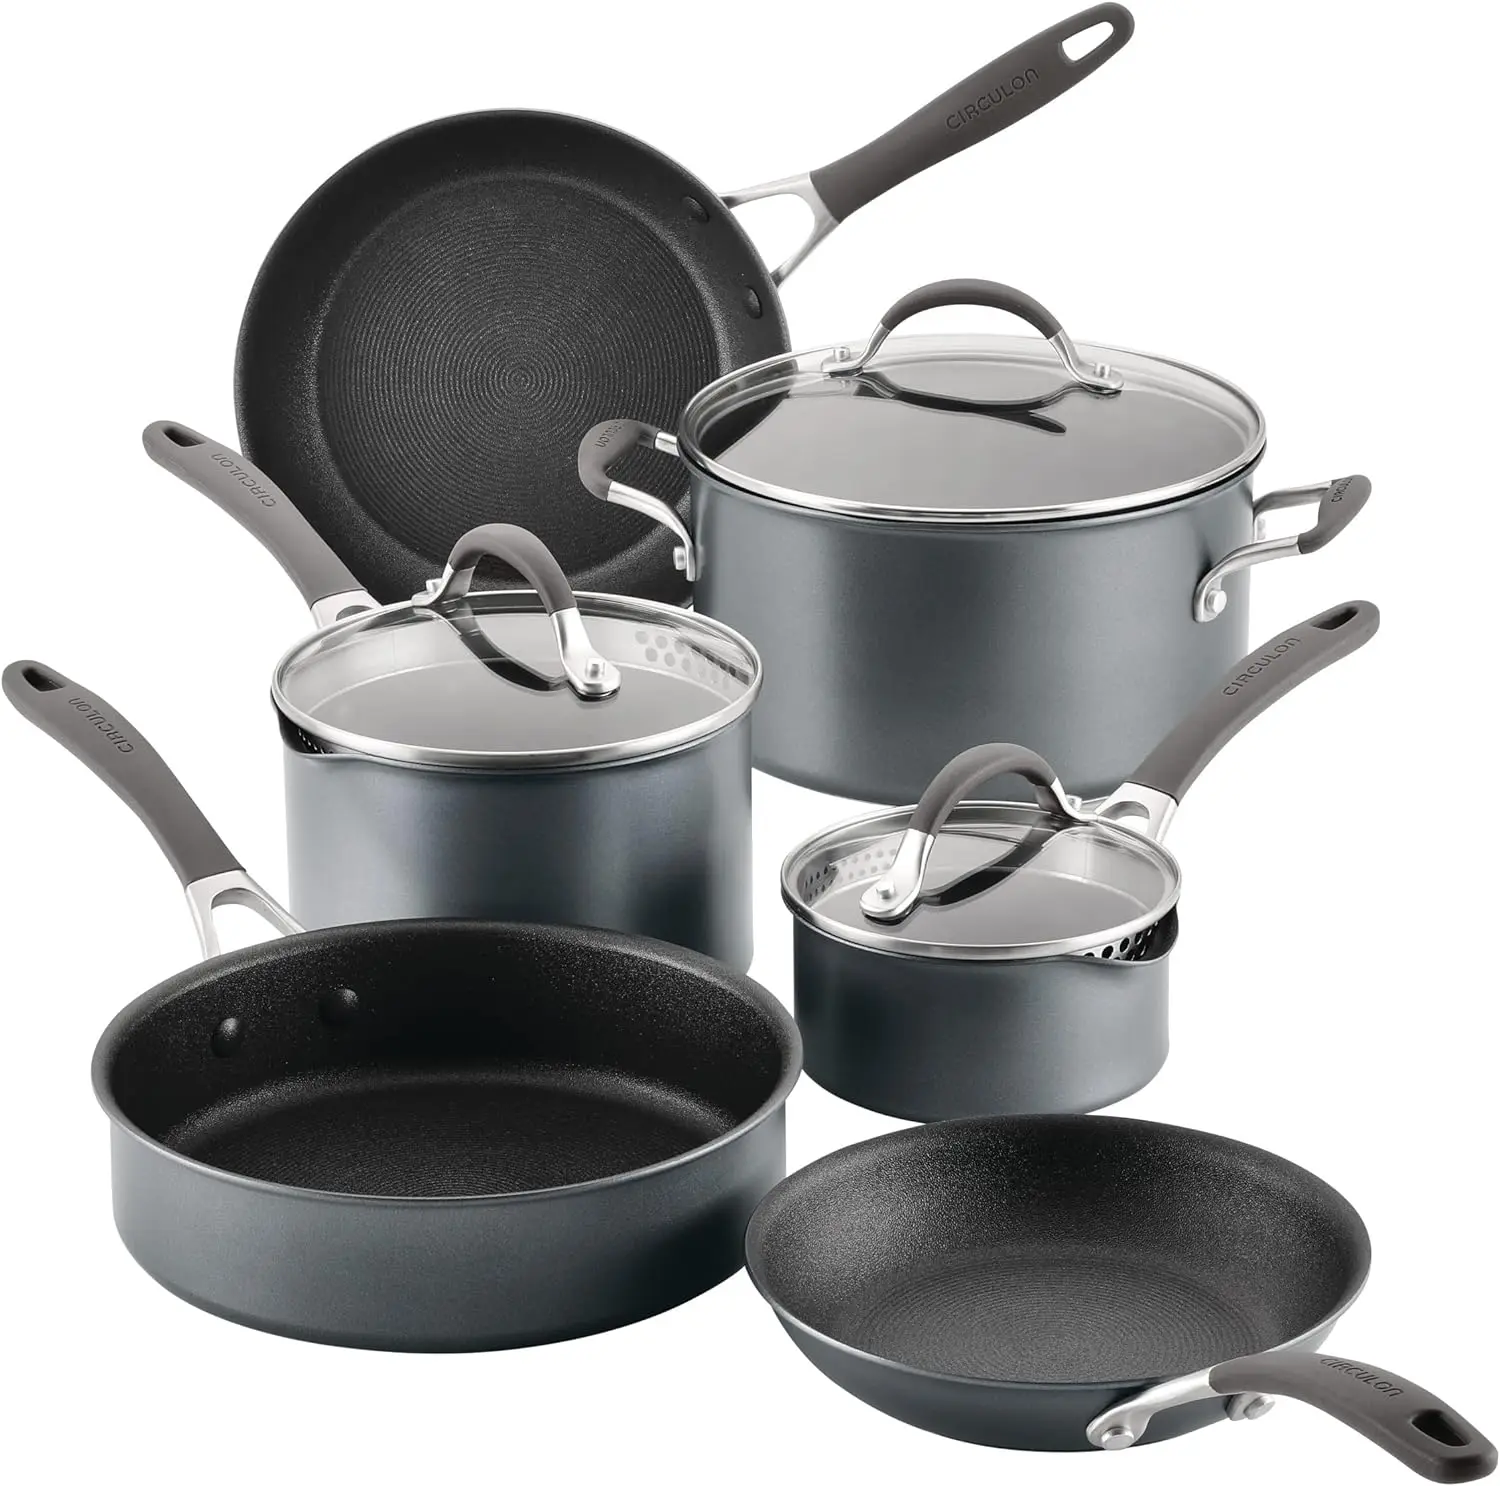 

Circulon A1 Series with ScratchDefense Technology Nonstick Induction Cookware/Pots and Pans Set, 9 Piece, Graphite